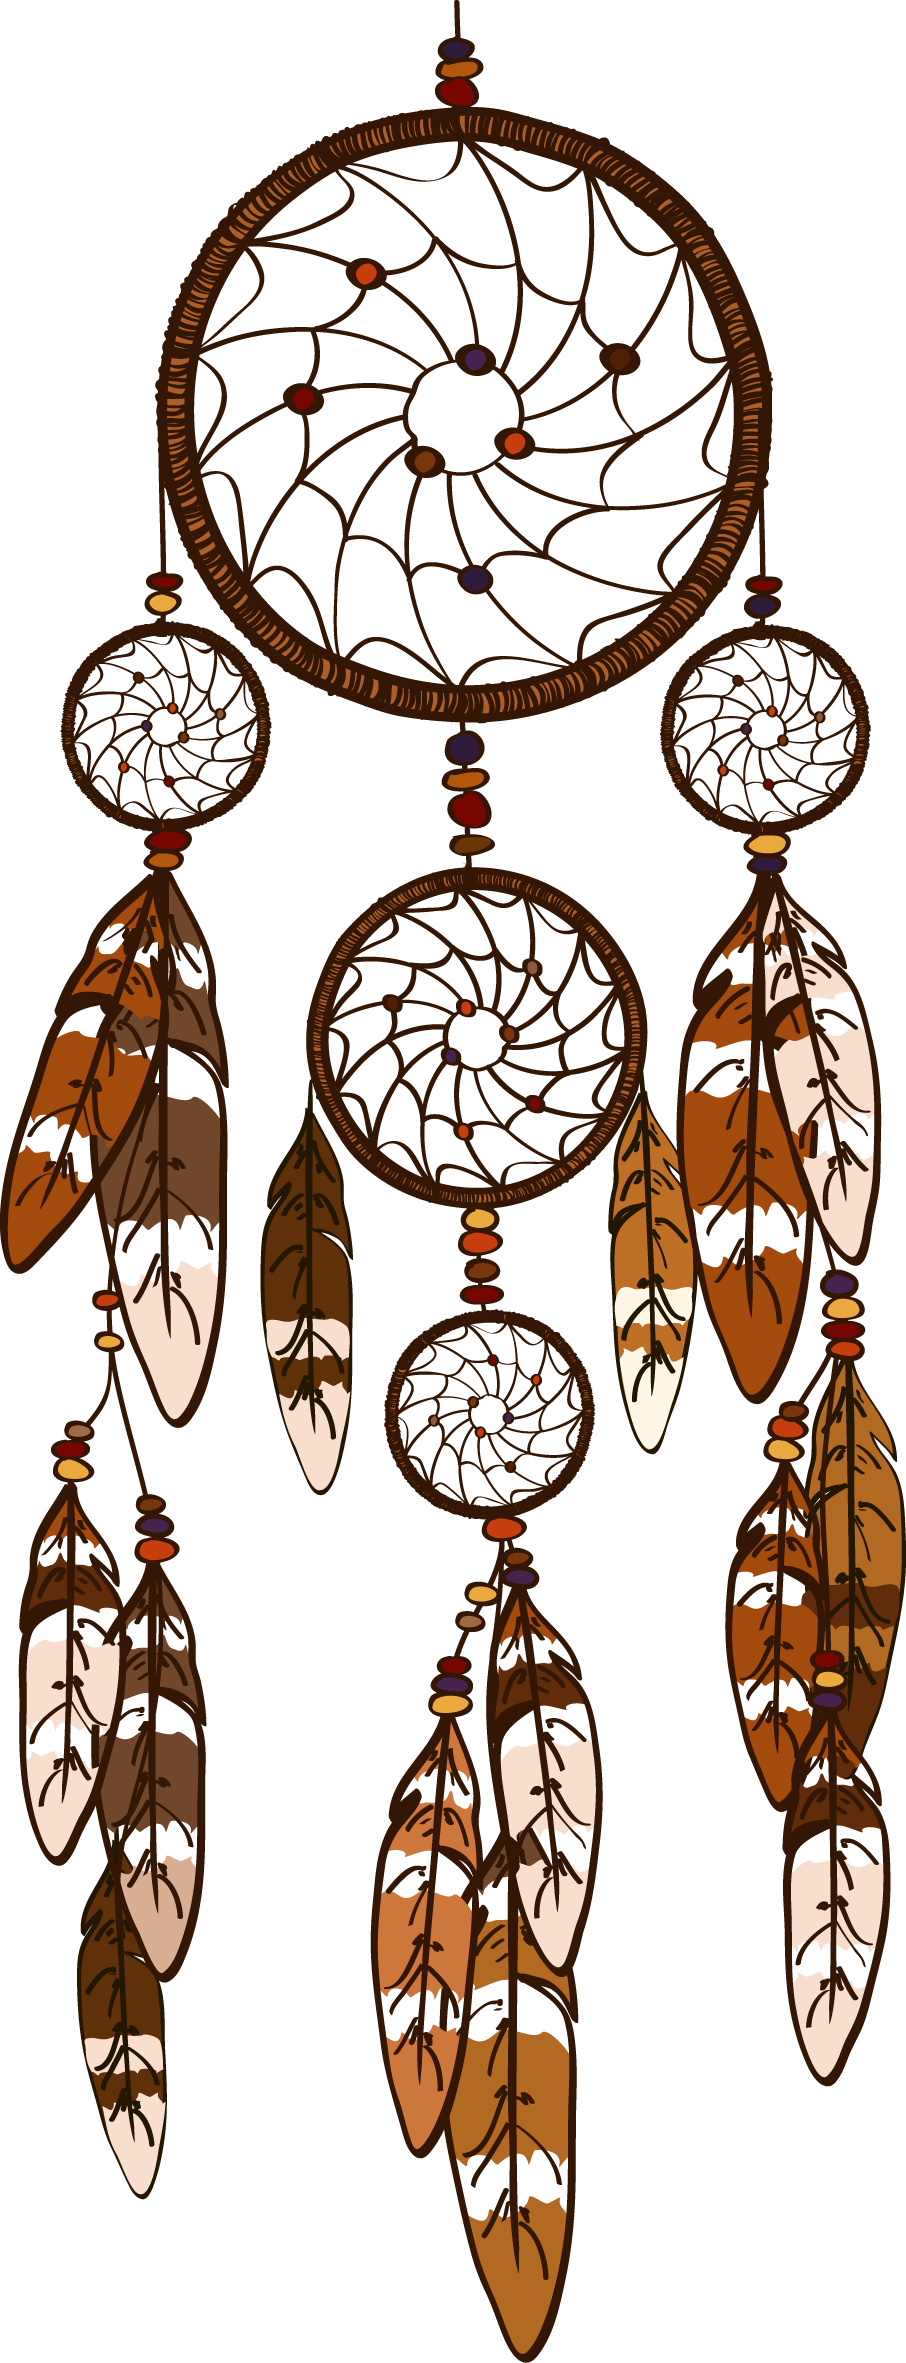 Decorative Feather Illustration Dreamcatcher PNG Image High Quality PNG Image